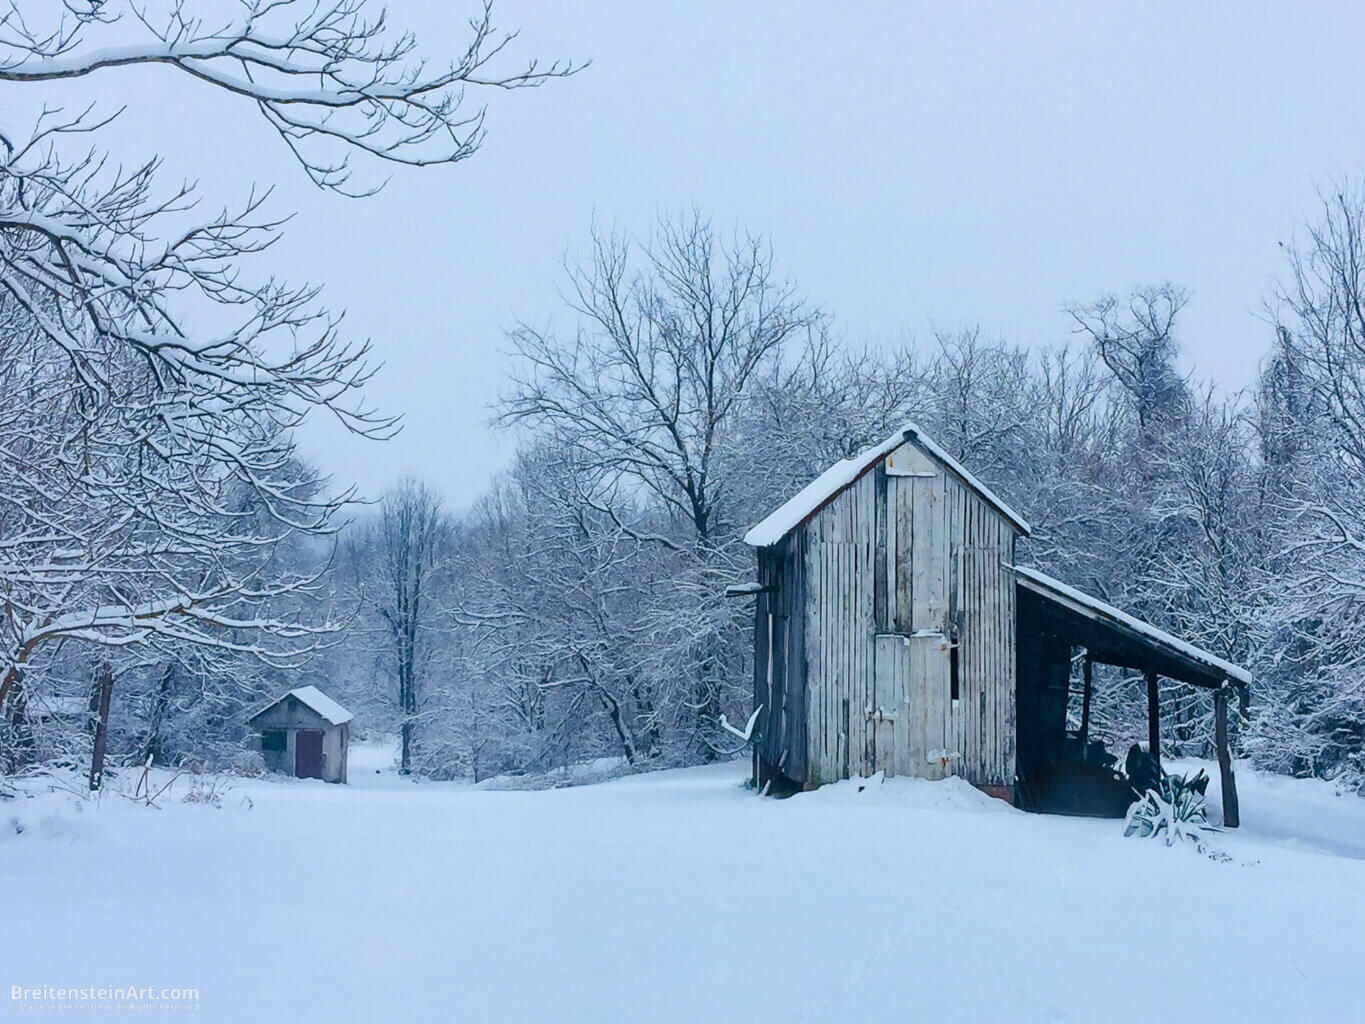 Photograph of a snowy, partly wooded rural scene in pale blues, with two large, old wood sheds. The trees are leafless, the branches laden with snow, and even the sky is completely overcast and a soft, pale blue that matches the snow.